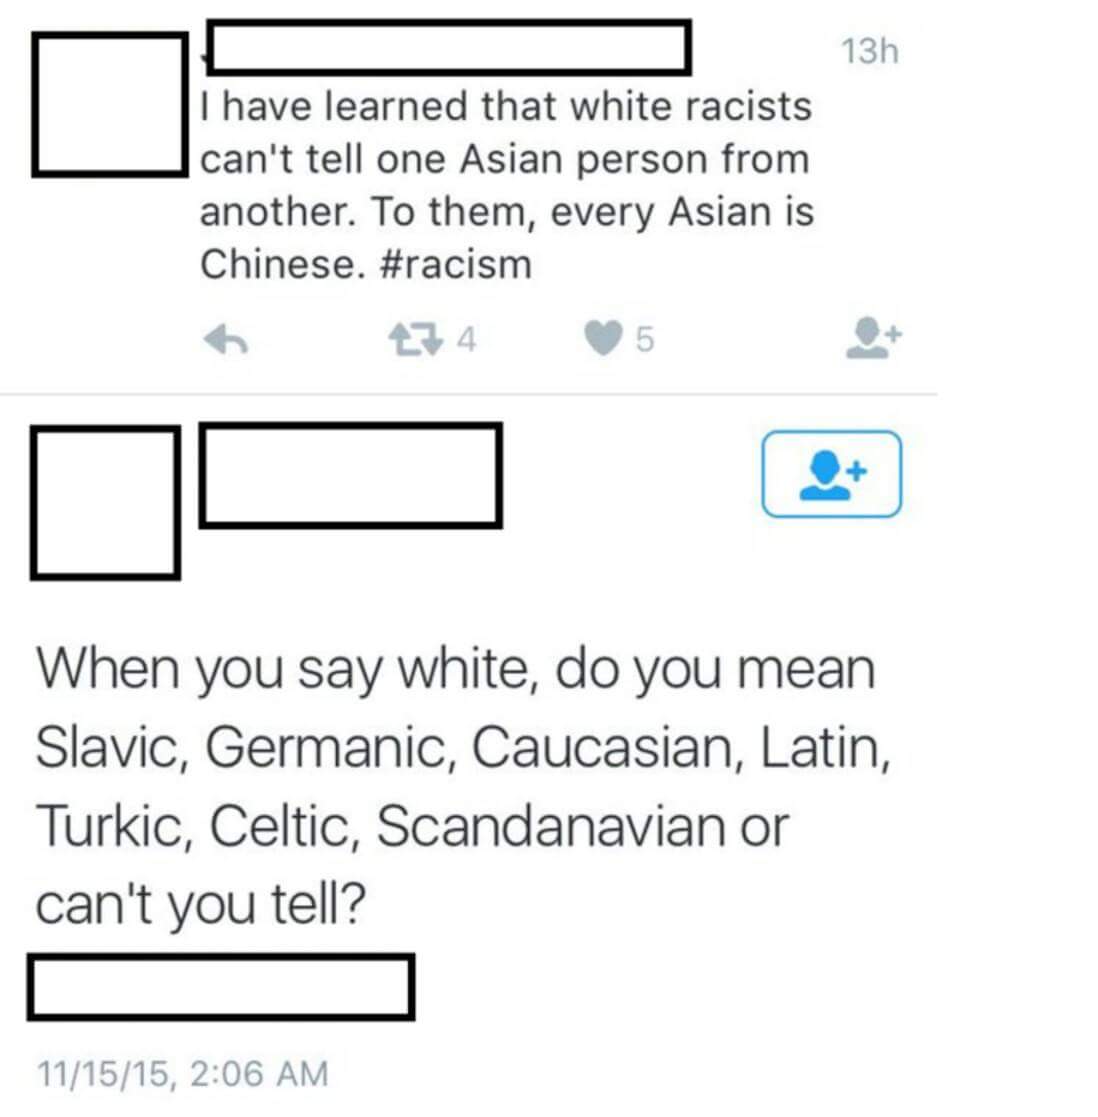 chinese and asian the same thing - 13h I have learned that white racists can't tell one Asian person from another. To them, every Asian is Chinese. 6 474 5 5 When you say white, do you mean Slavic, Germanic, Caucasian, Latin, Turkic, Celtic, Scandanavian 